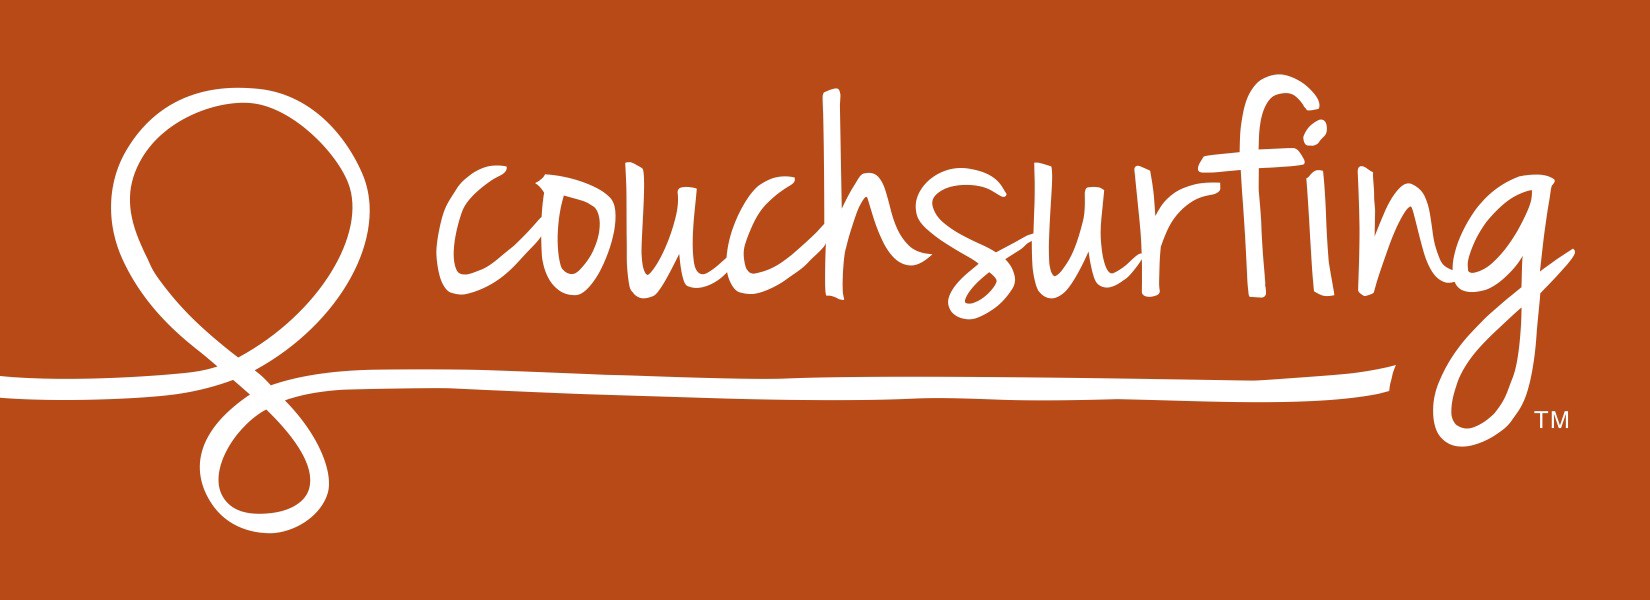 Couchsurfing.com Useful travel website